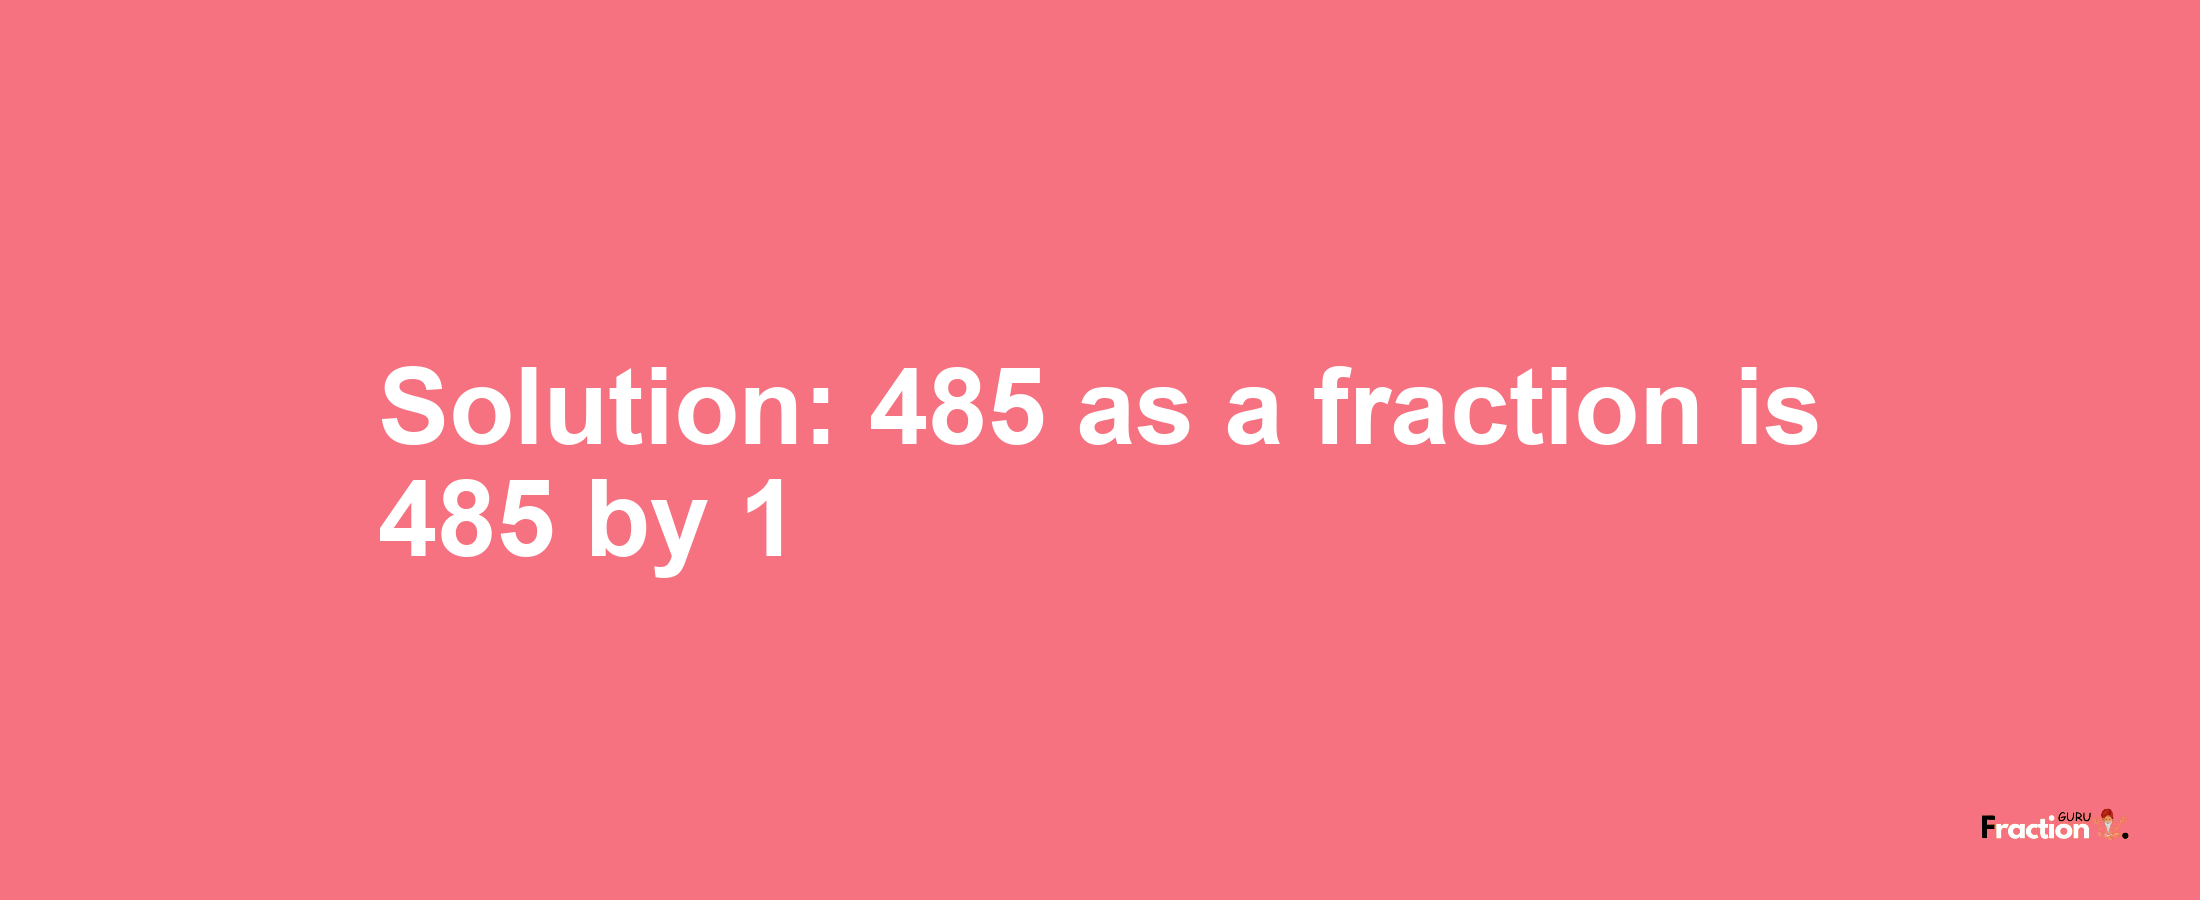 Solution:485 as a fraction is 485/1